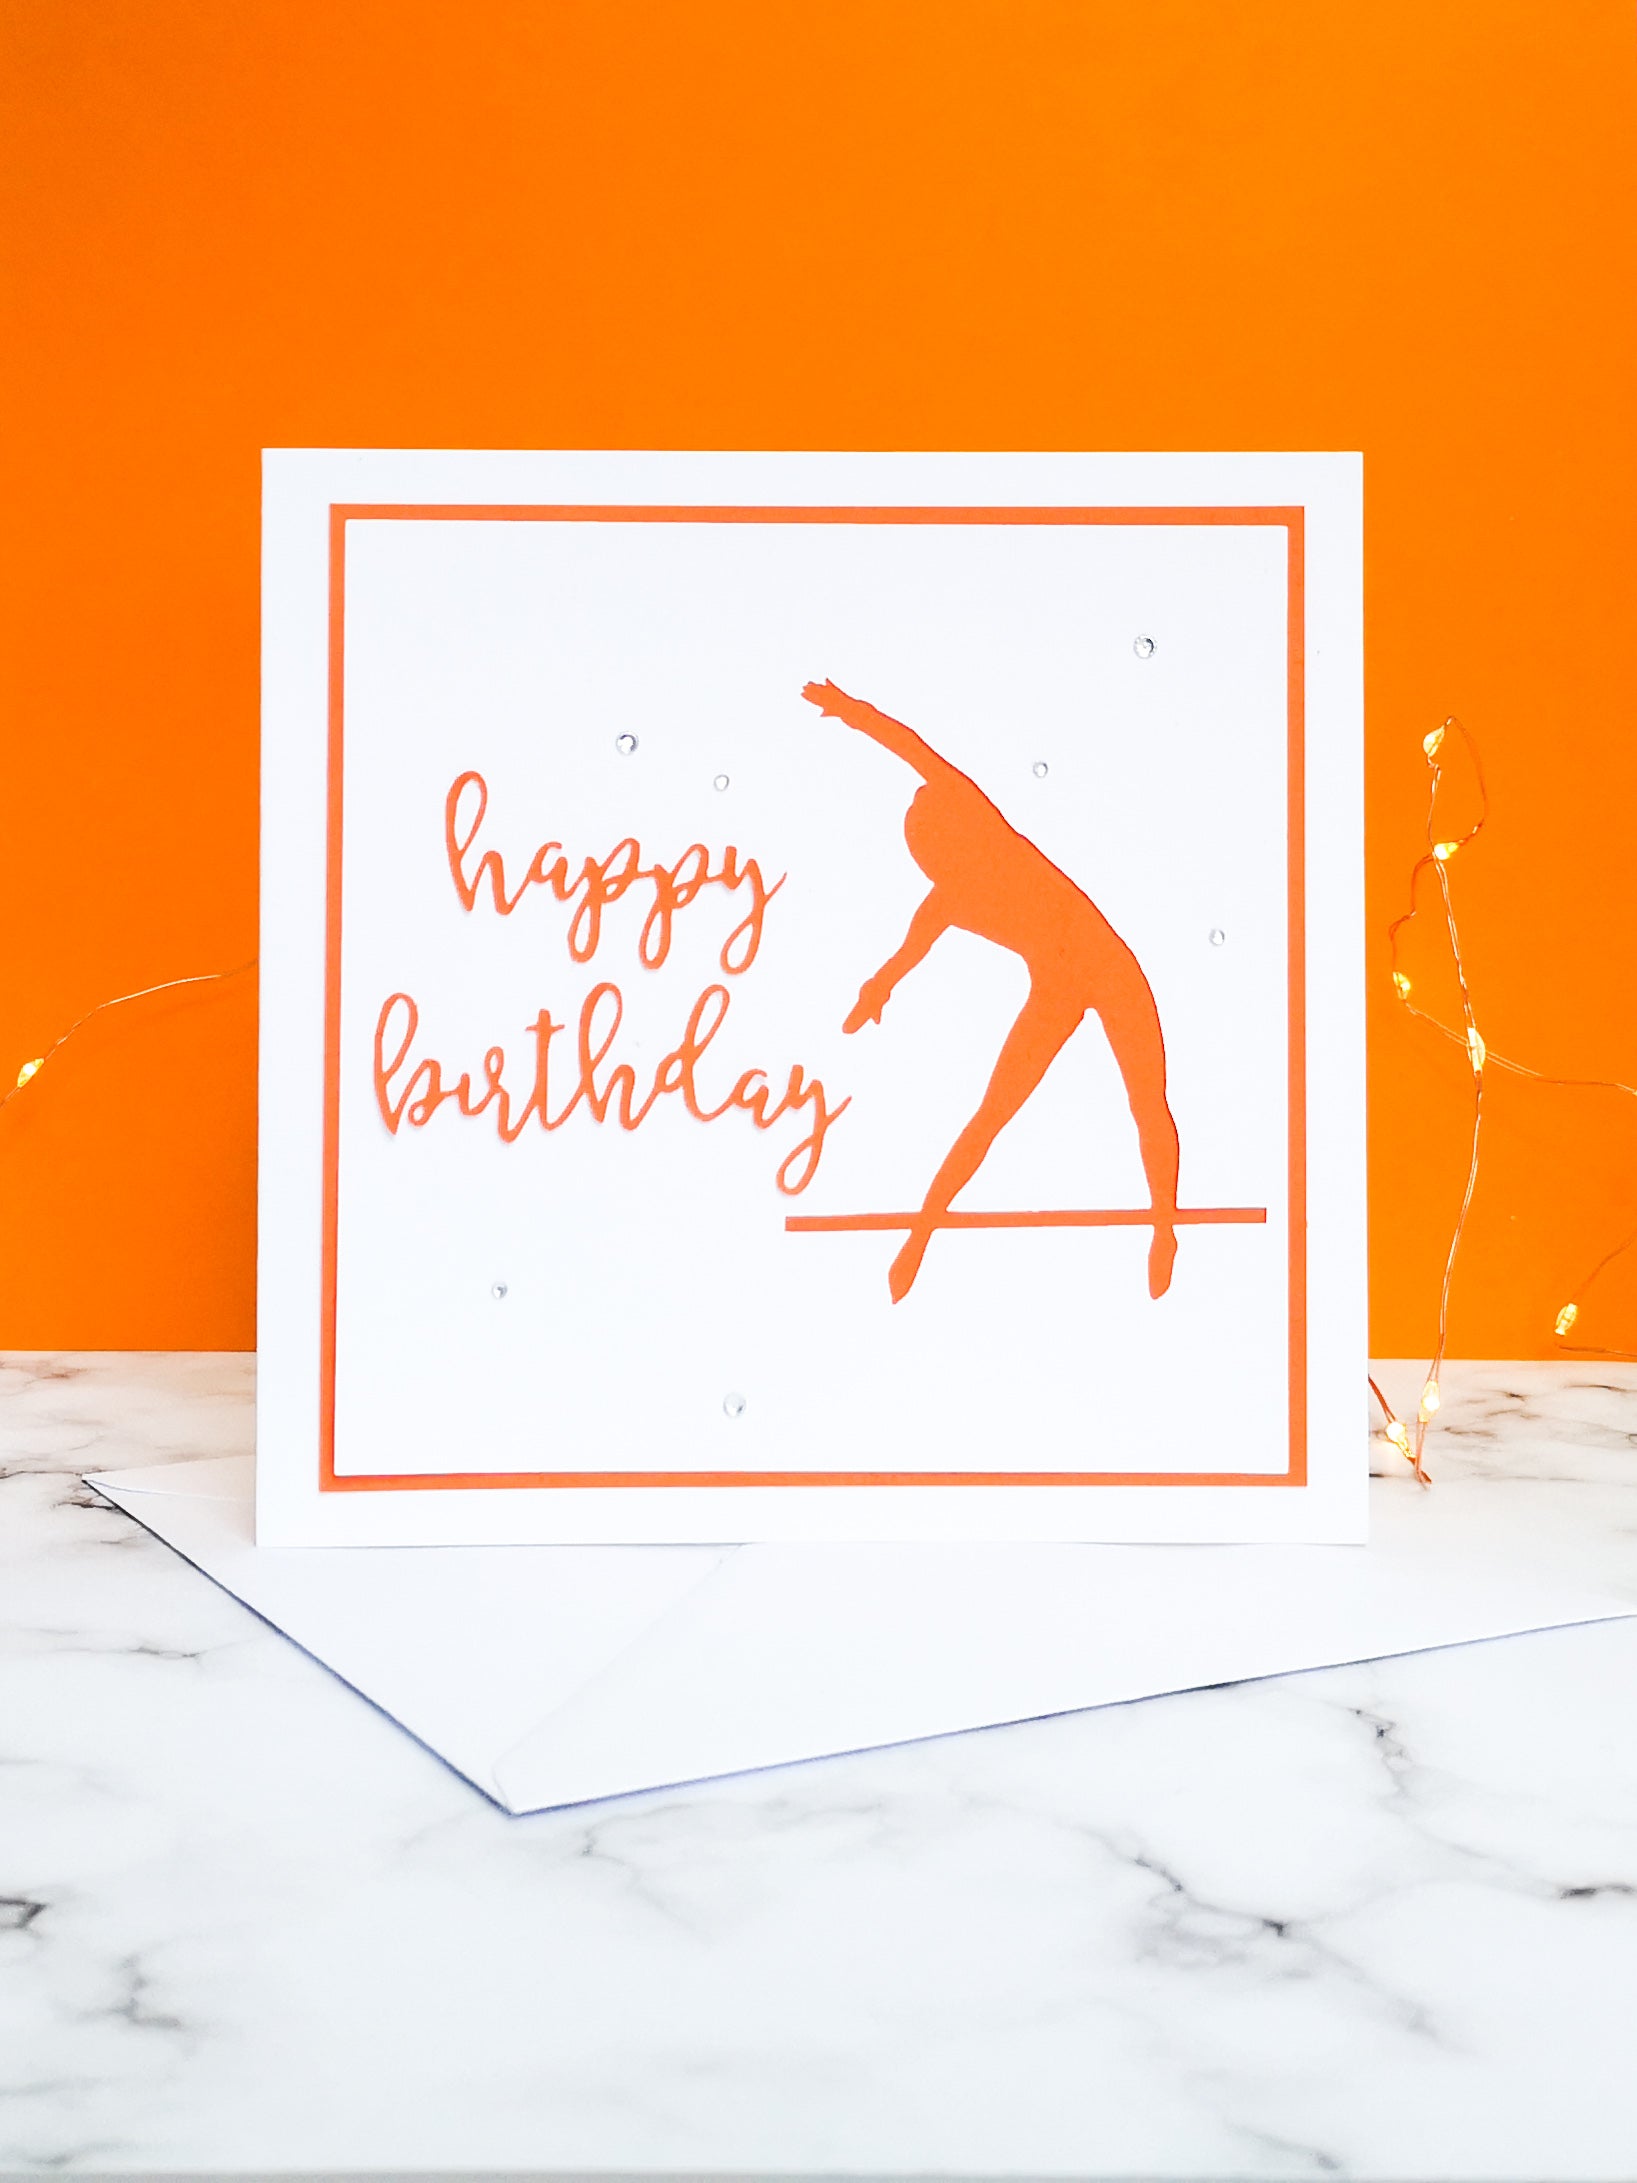 Tkatchev | Handmade Large Square Silhouette Birthday Card | The Bright Edition